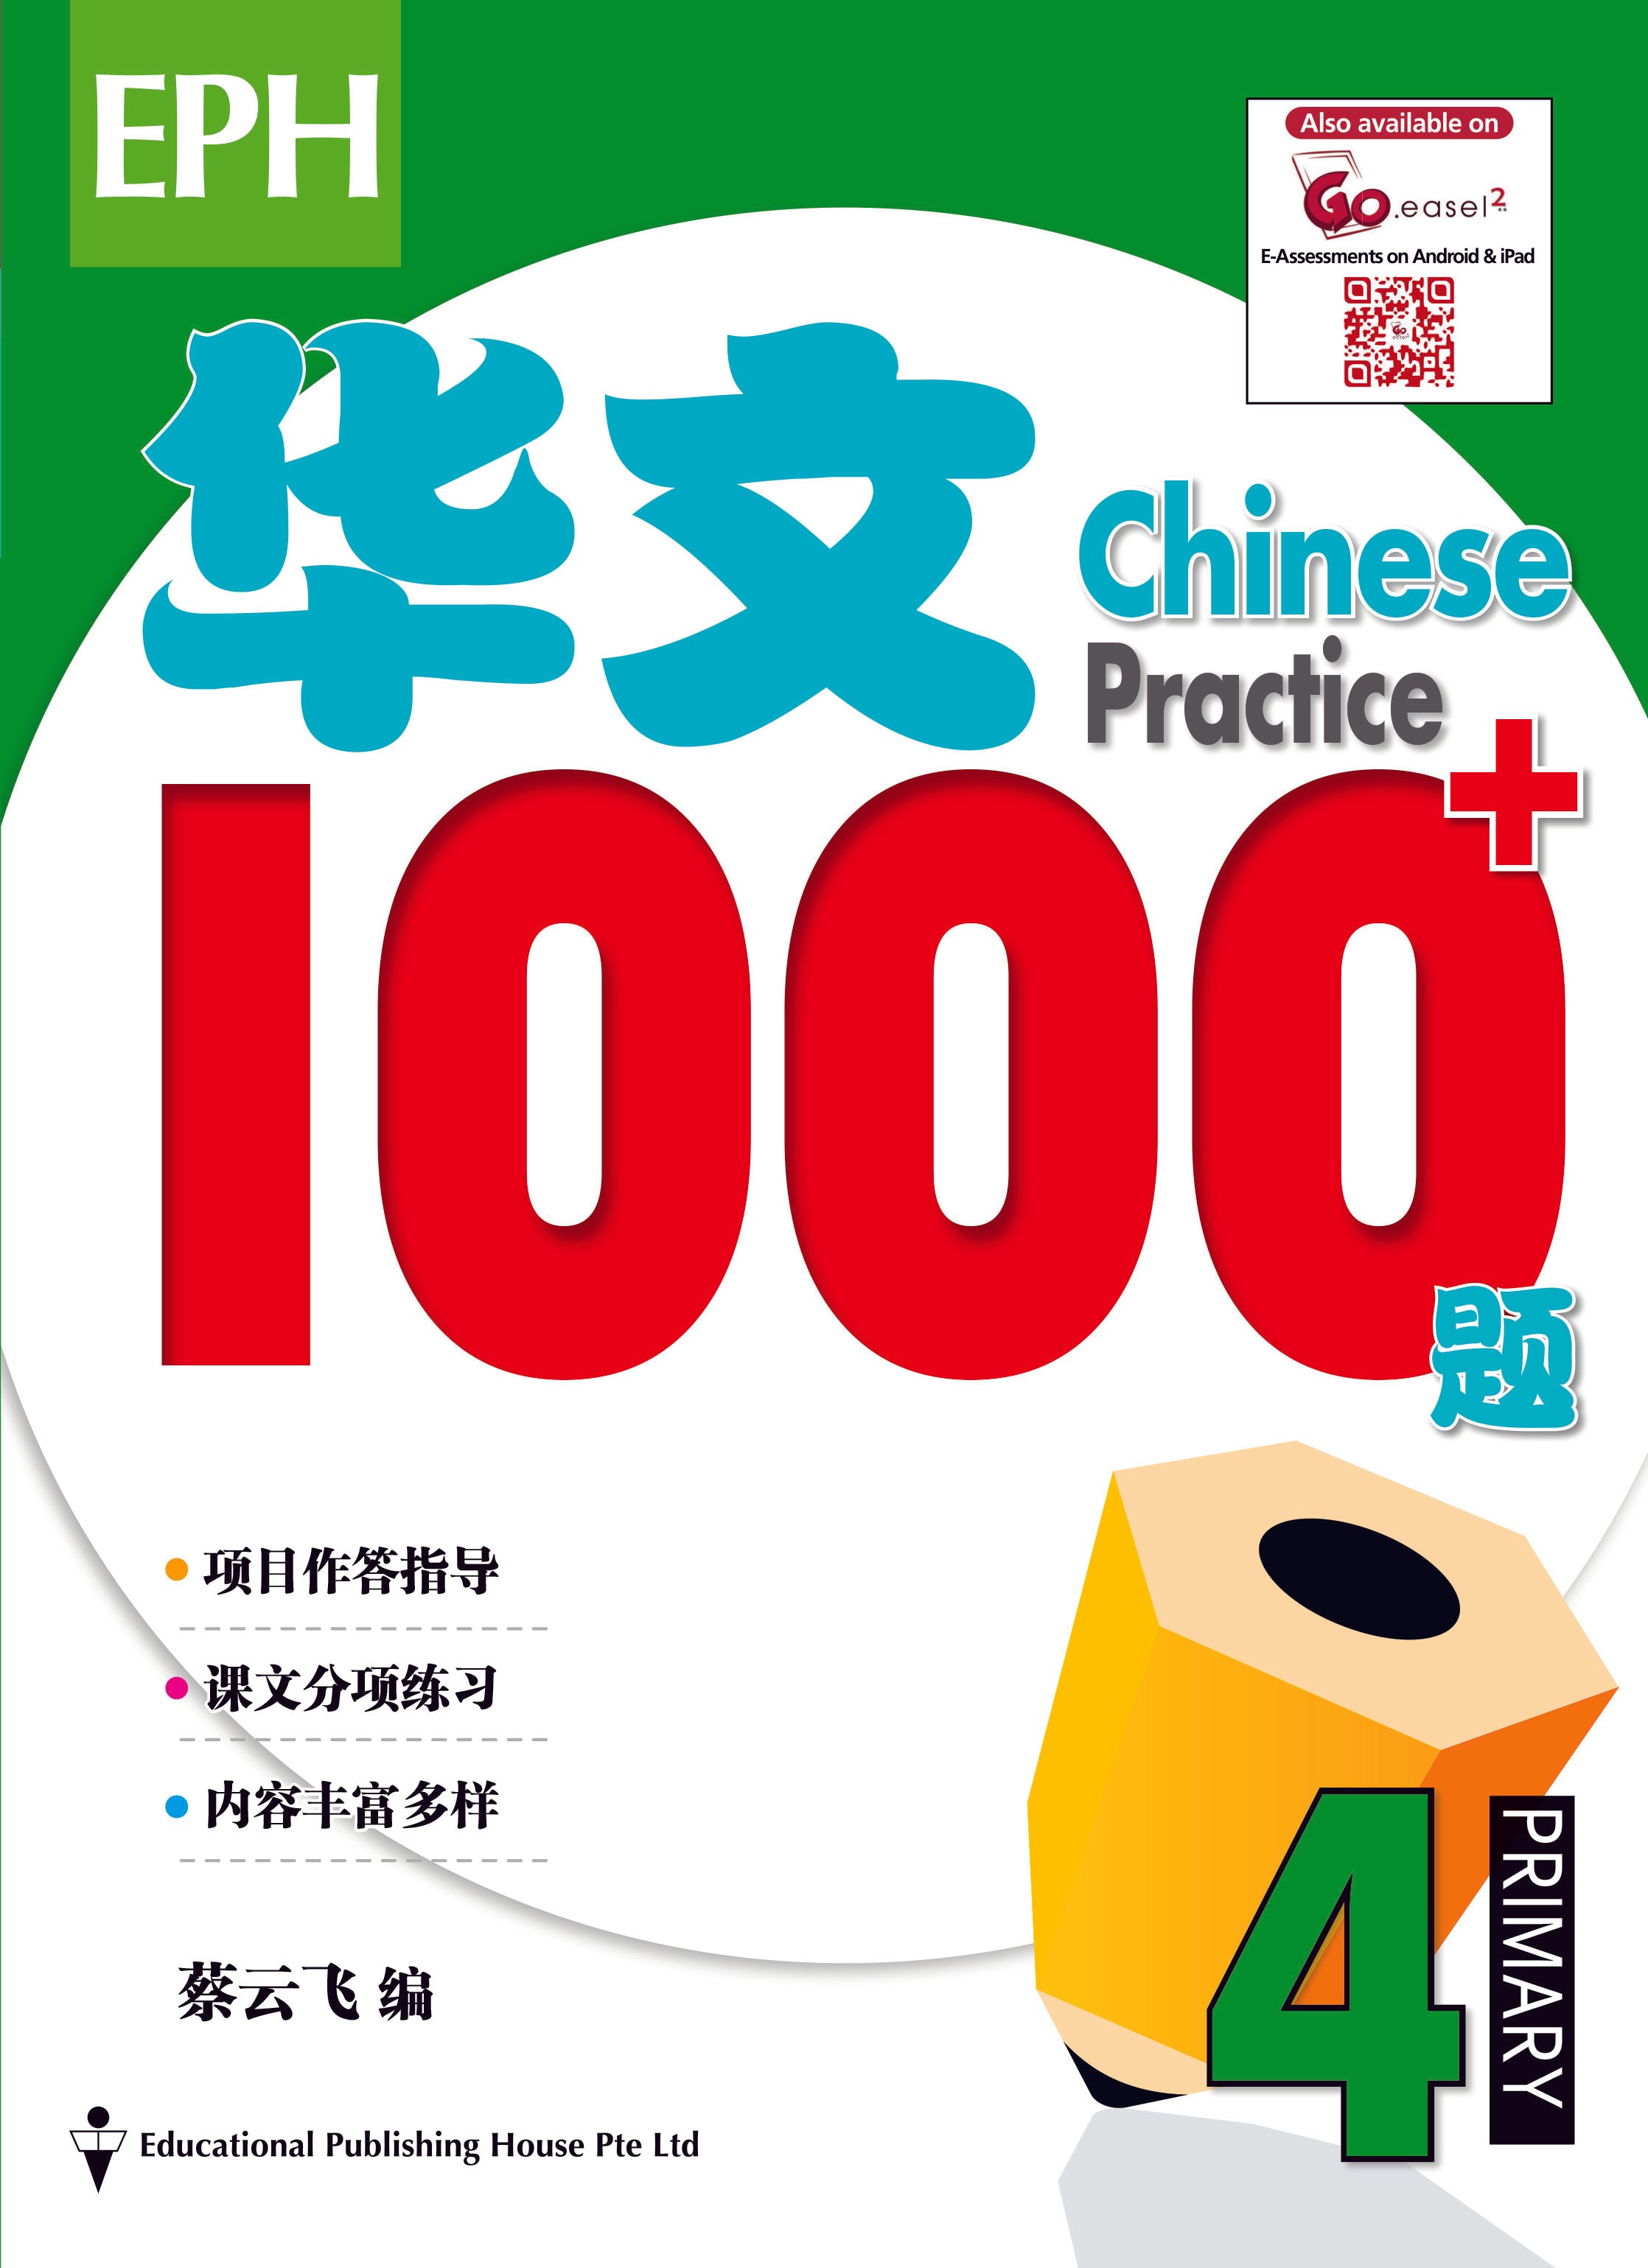 Primary 4 Chinese Practice 1000+ 华文1000题 - _MS, CHALLENGING, CHINESE, EDUCATIONAL PUBLISHING HOUSE